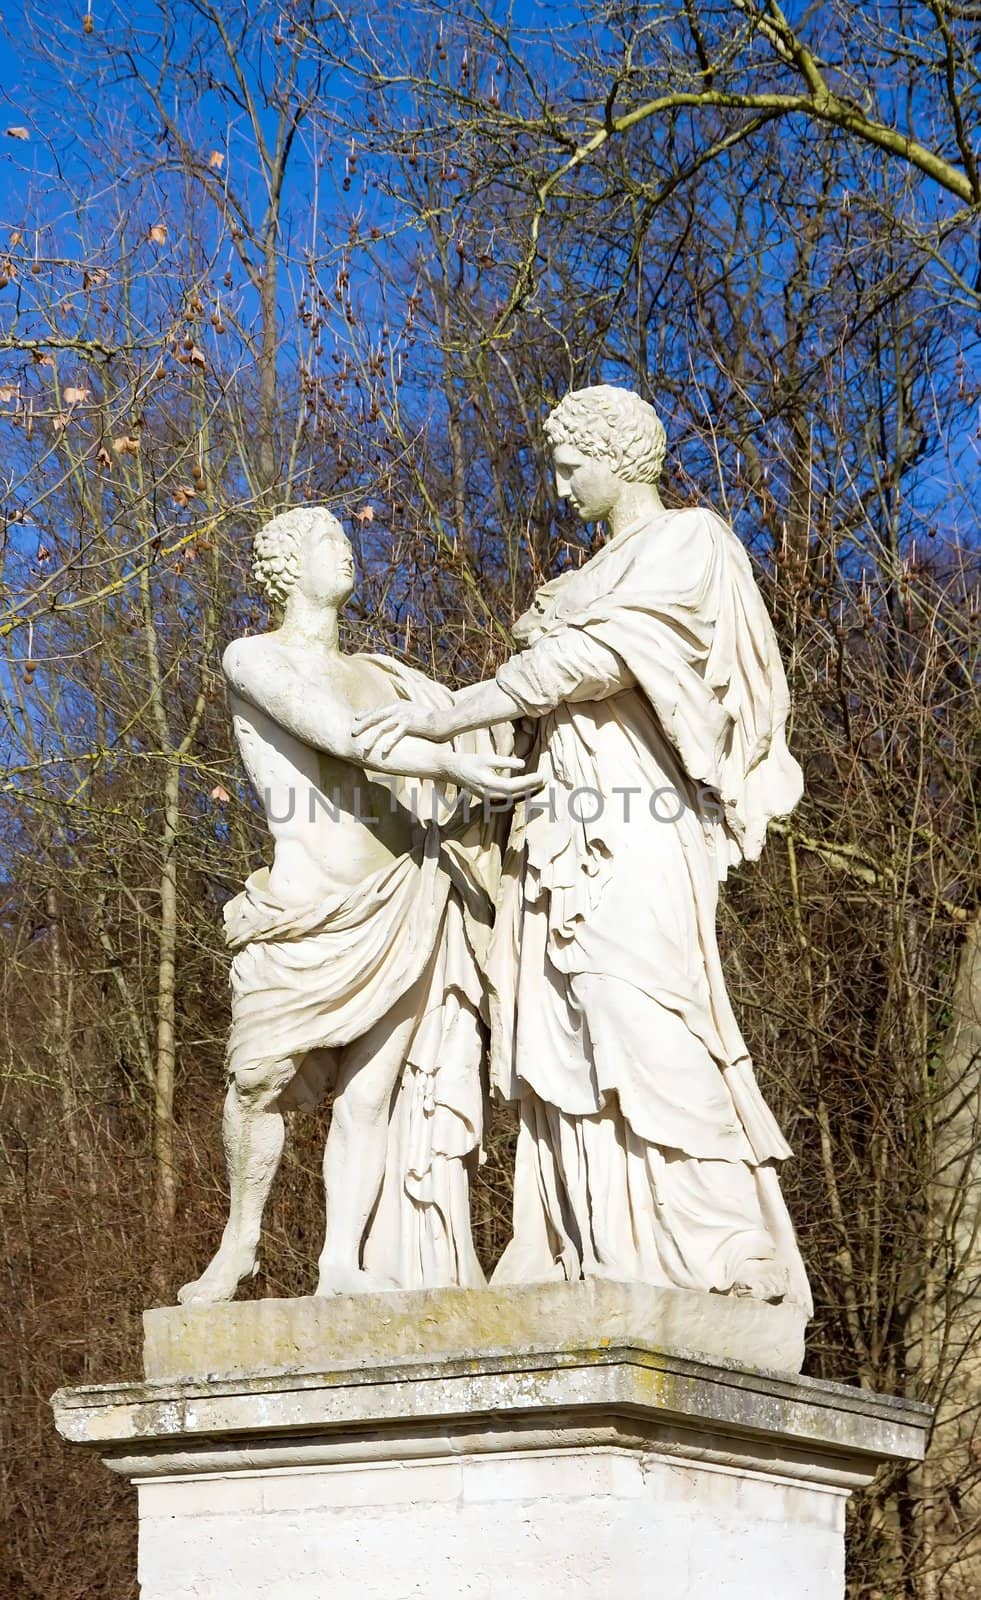 male friendship, ancient statue depicting two men having affection for one another